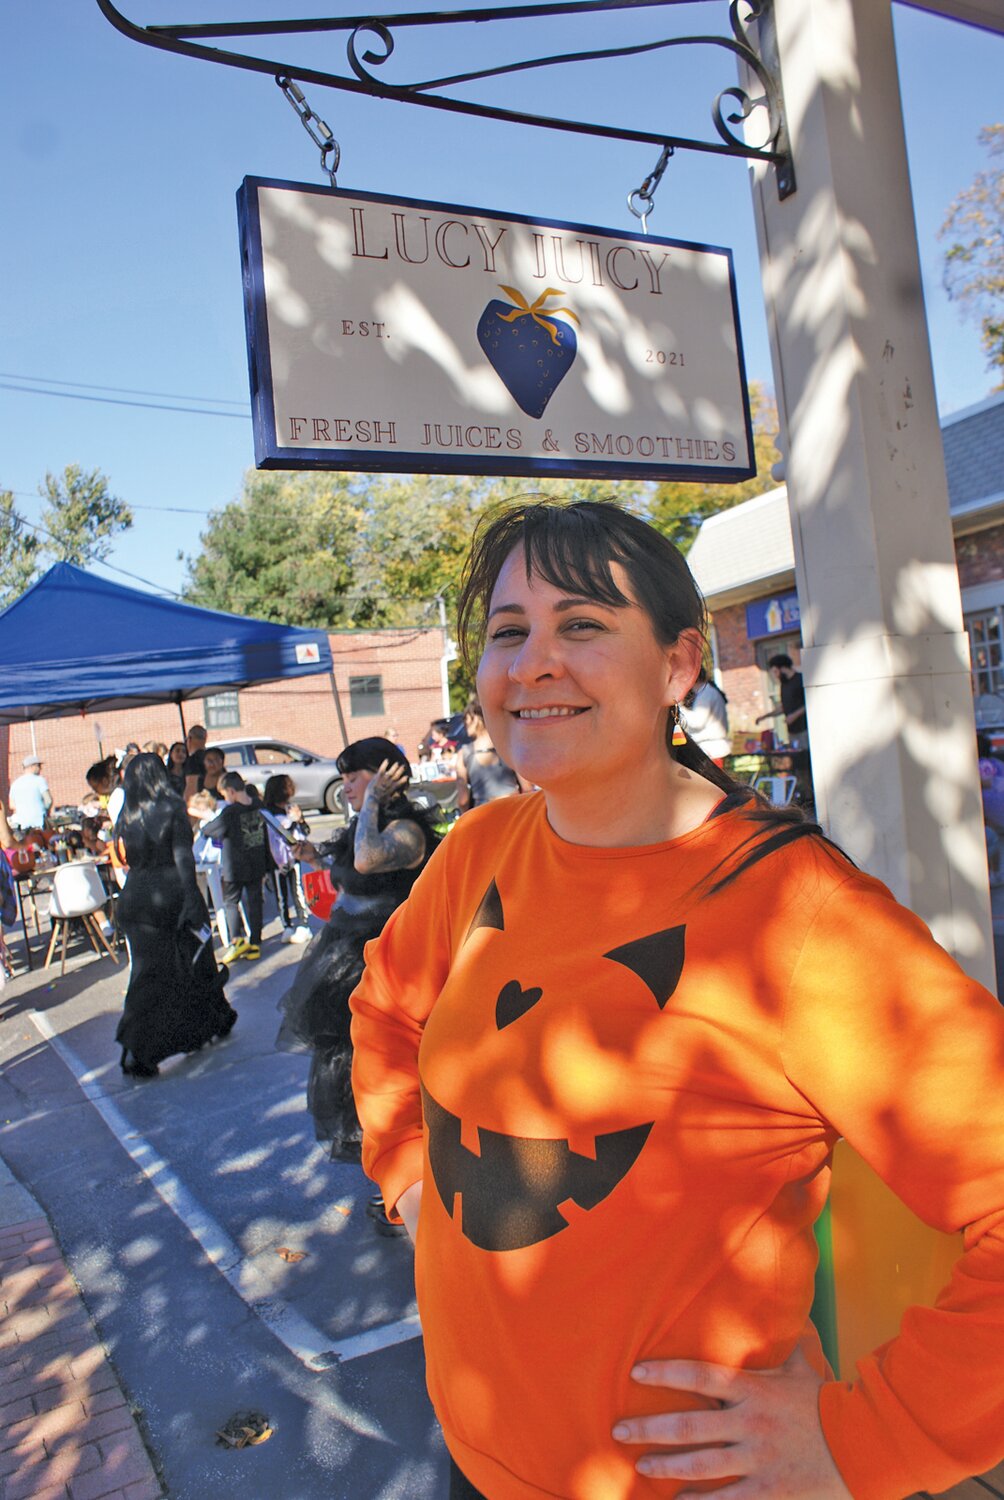 NO TRICKS JUST TREATS: Lucy Juicy owner Shawna Gierhart joins in with other business owners on Broad Street by handing out Halloween treats to excited children dressed up for the parade.